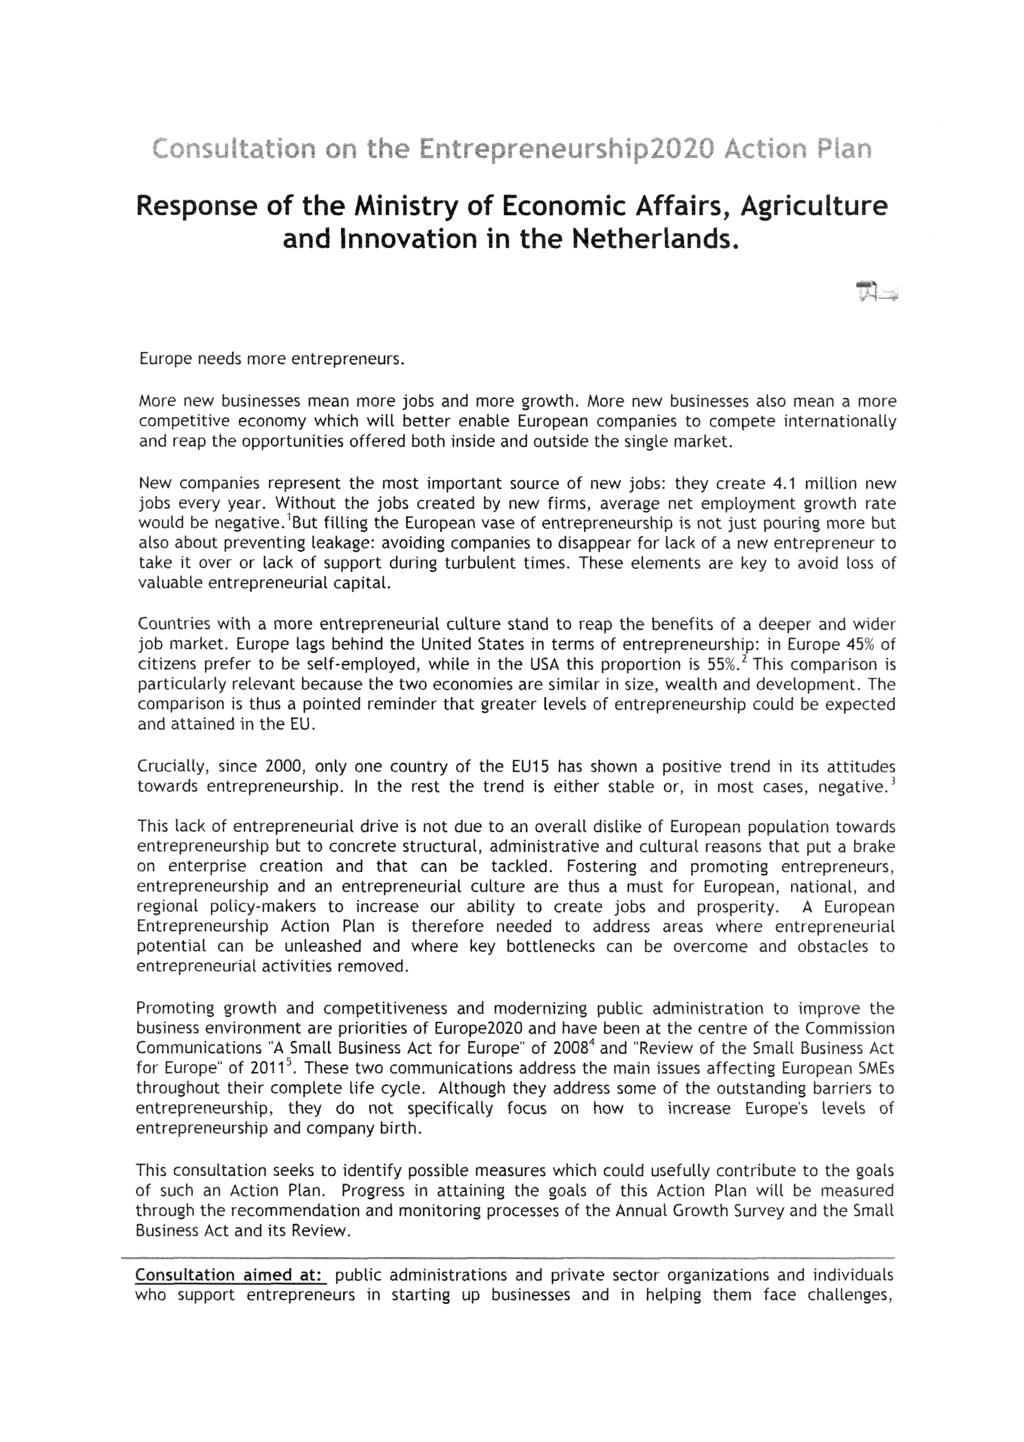 Consultatiori on the EntrepreneursliipŽÖŽO Action Plan Response of the Ministry of Economic Affairs, Agriculture and Innovation in the Netherlands. Europe needs more entrepreneurs.